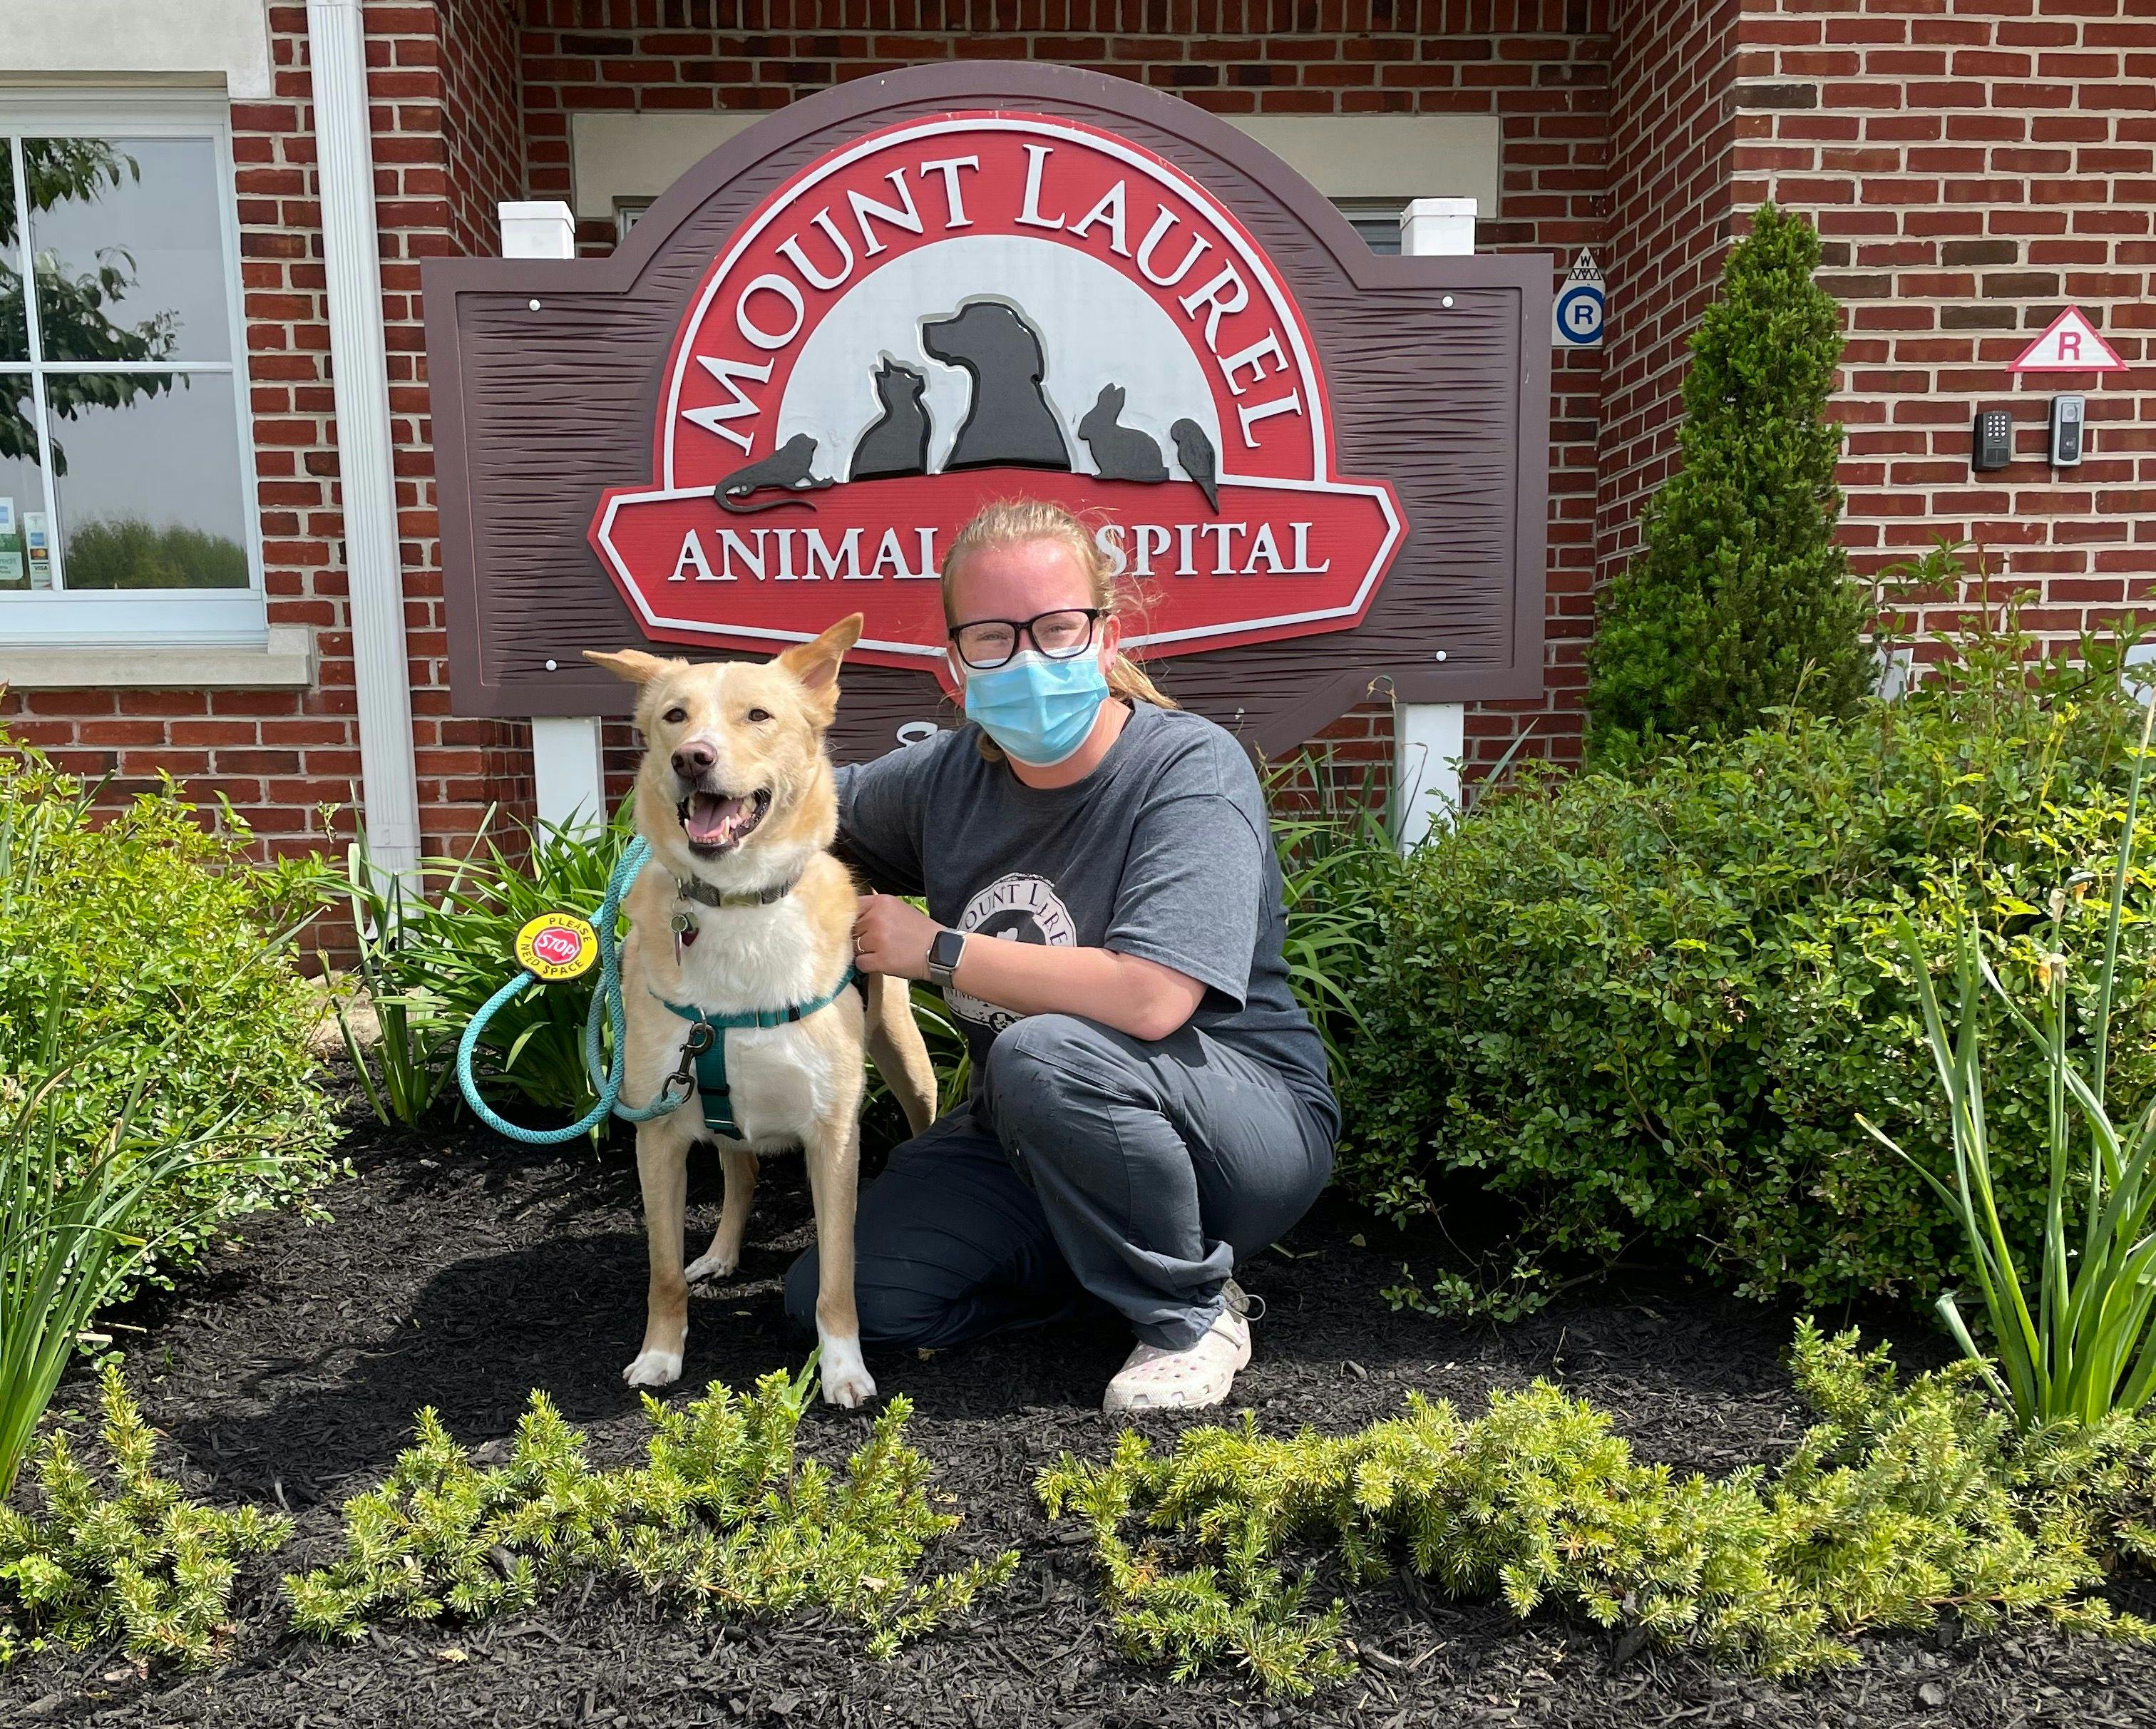 NJ animal hospital creates “Happy Visits” for anxious patients